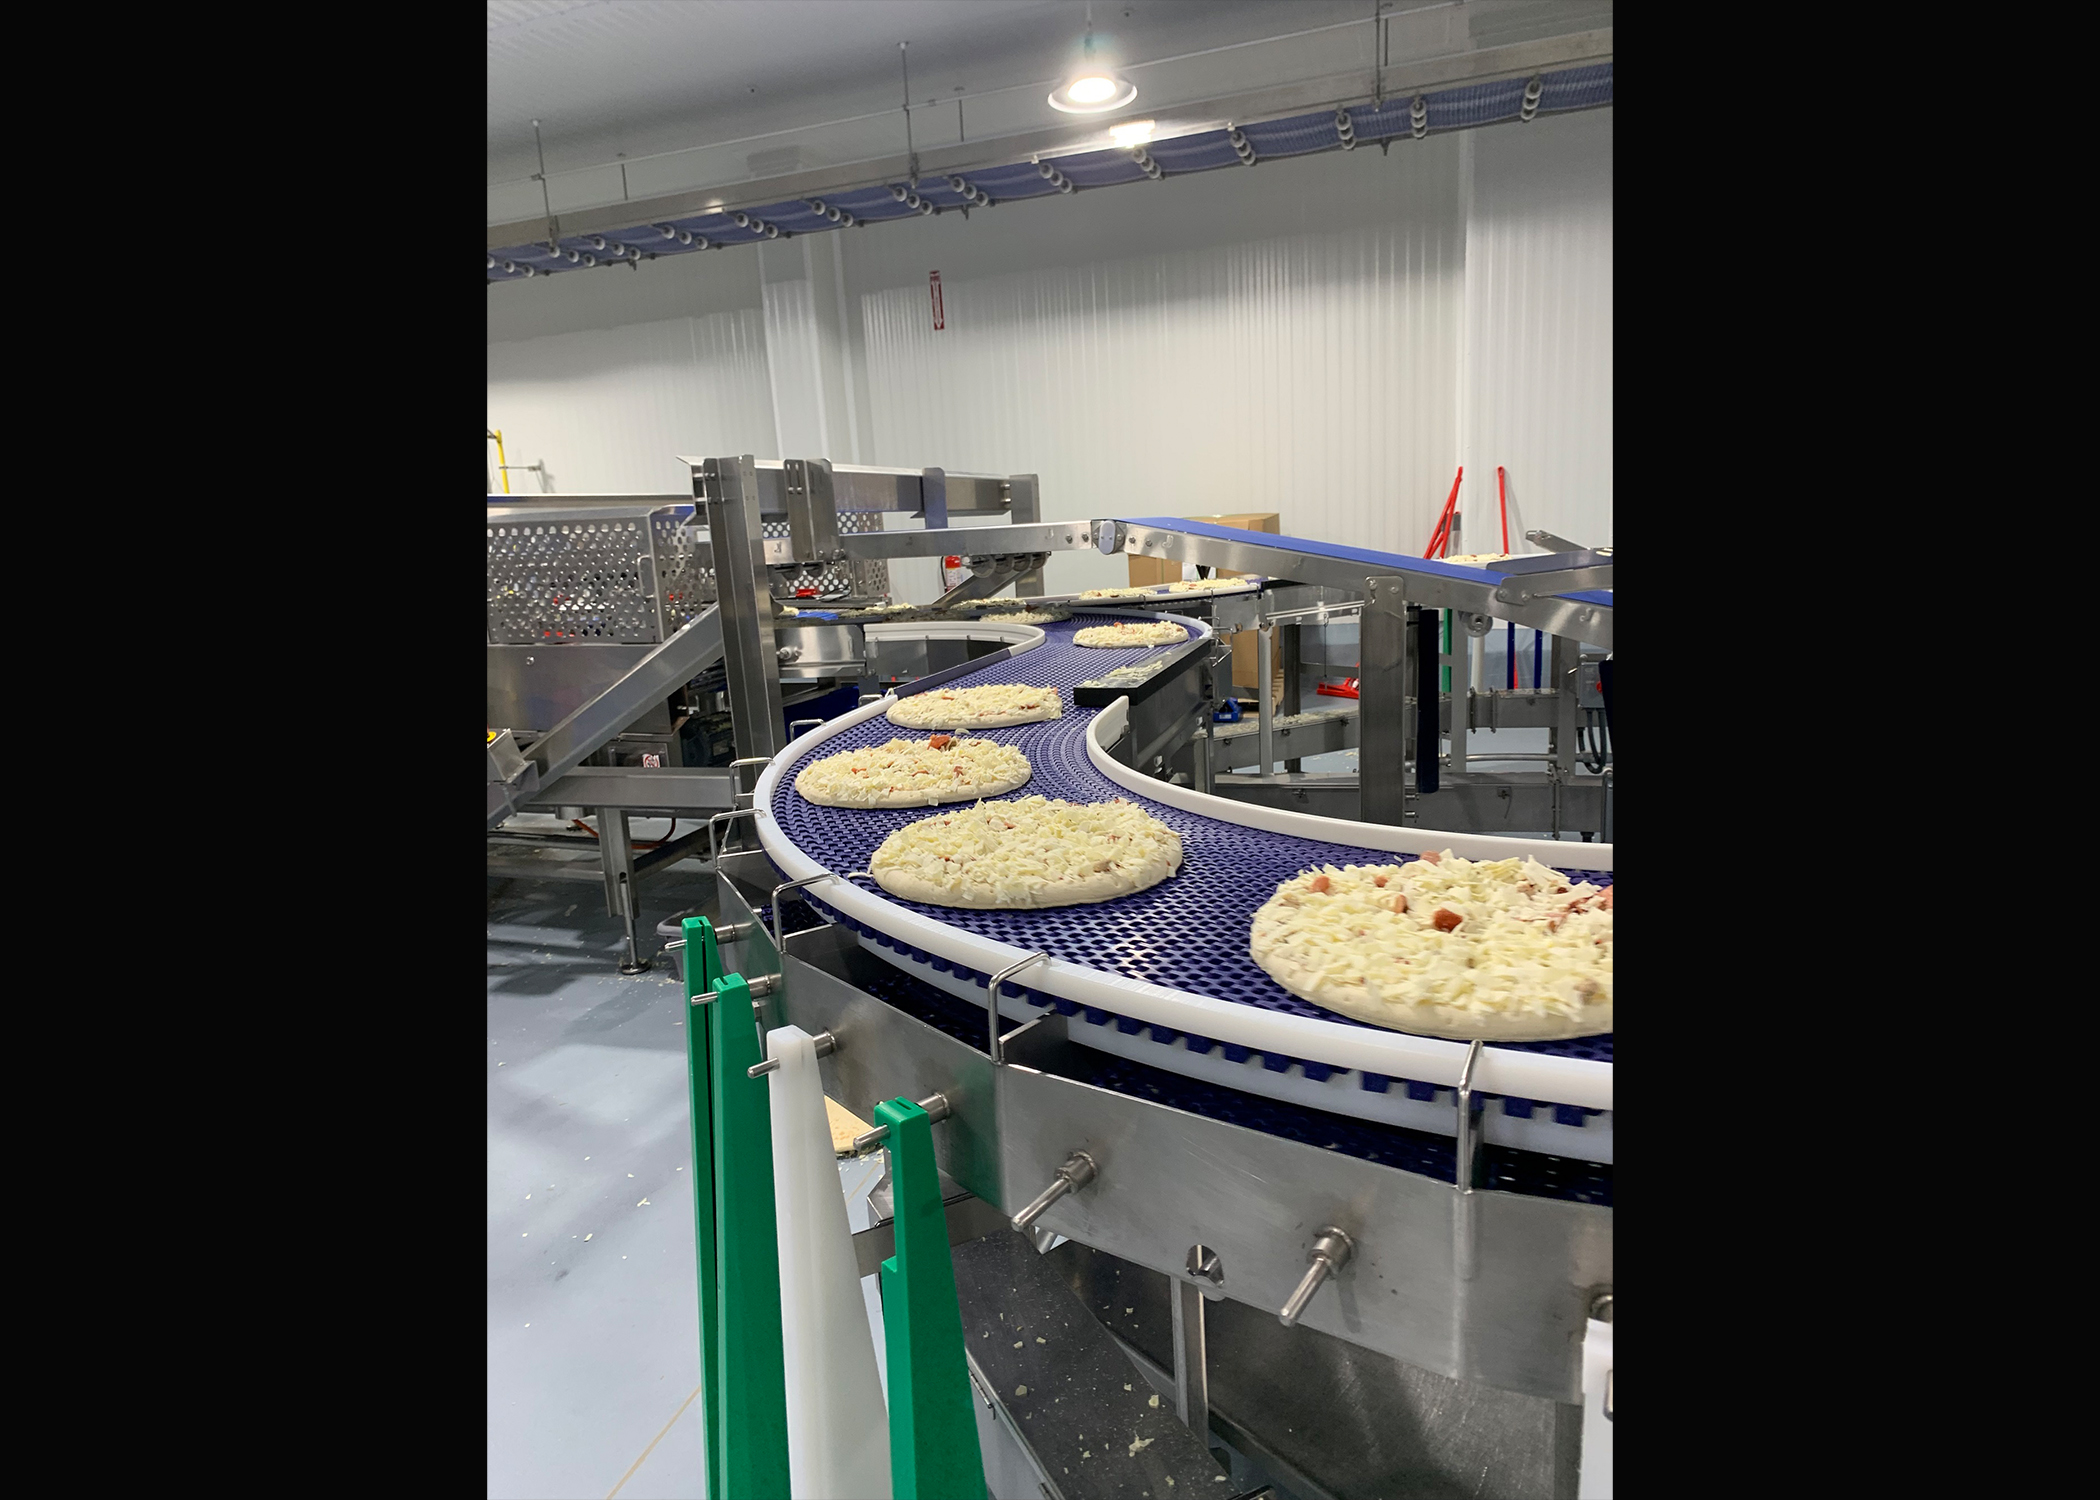 Frozen pizzas made in Wisconsin are on their way to being wrapped, packaged and then shipped to groceries stores across the Midwest. (Photos by Jana Rose Schleis)